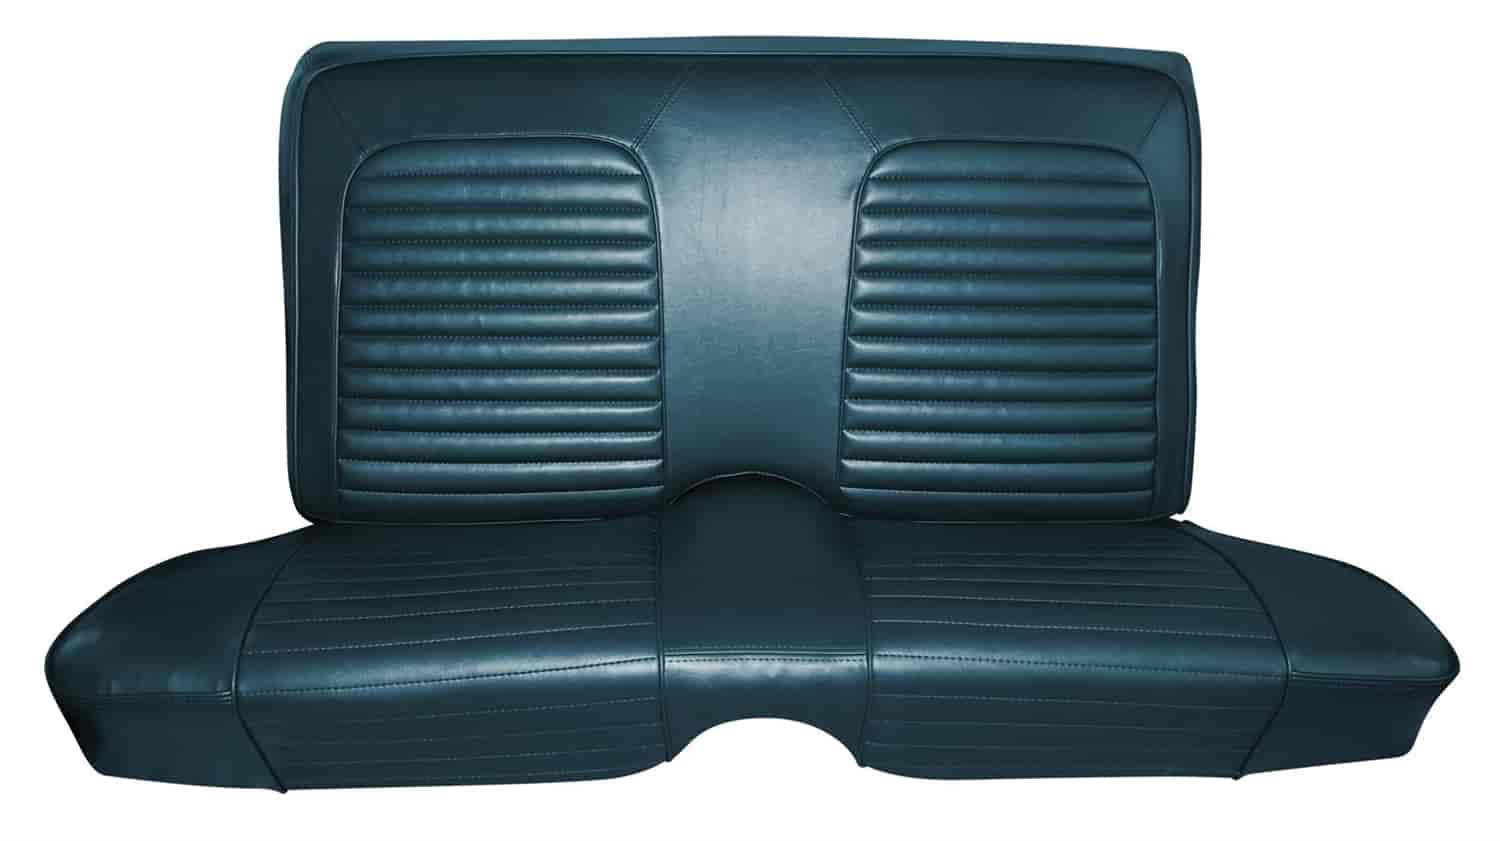 1963 Ford Falcon Futura Convertible Interior with Front Bucket Seats Front and Rear Upholstery Set